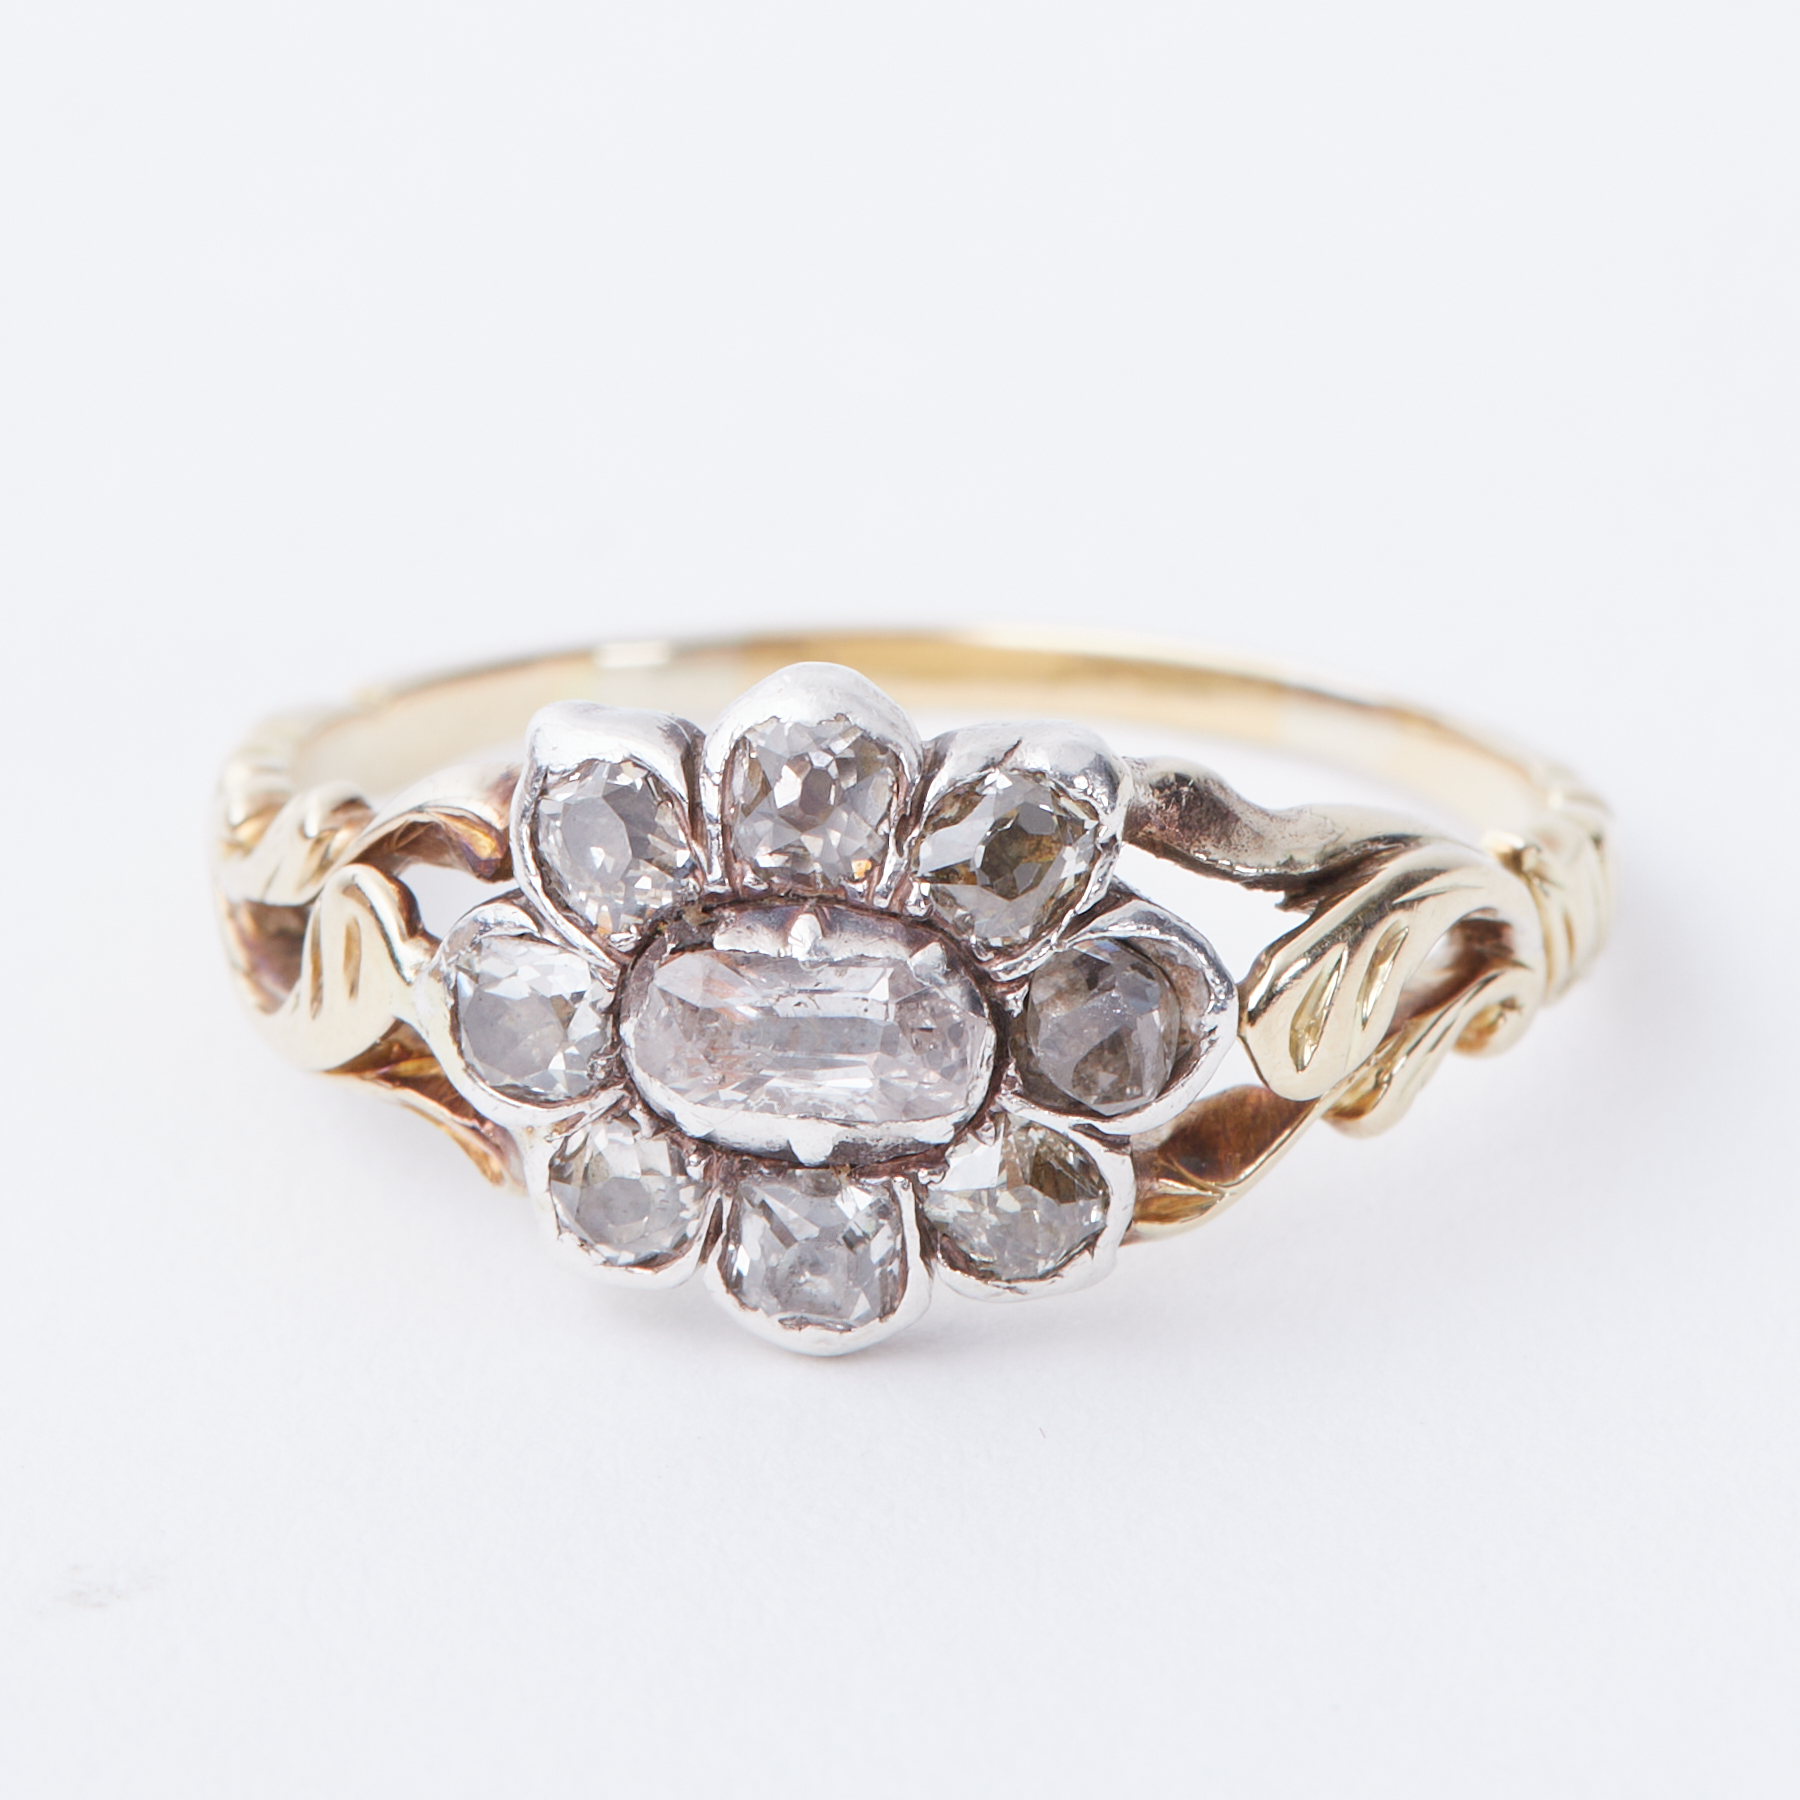 A Georgian flower design ring with ornate shoulders set with a central old cut oval shaped - Image 2 of 2